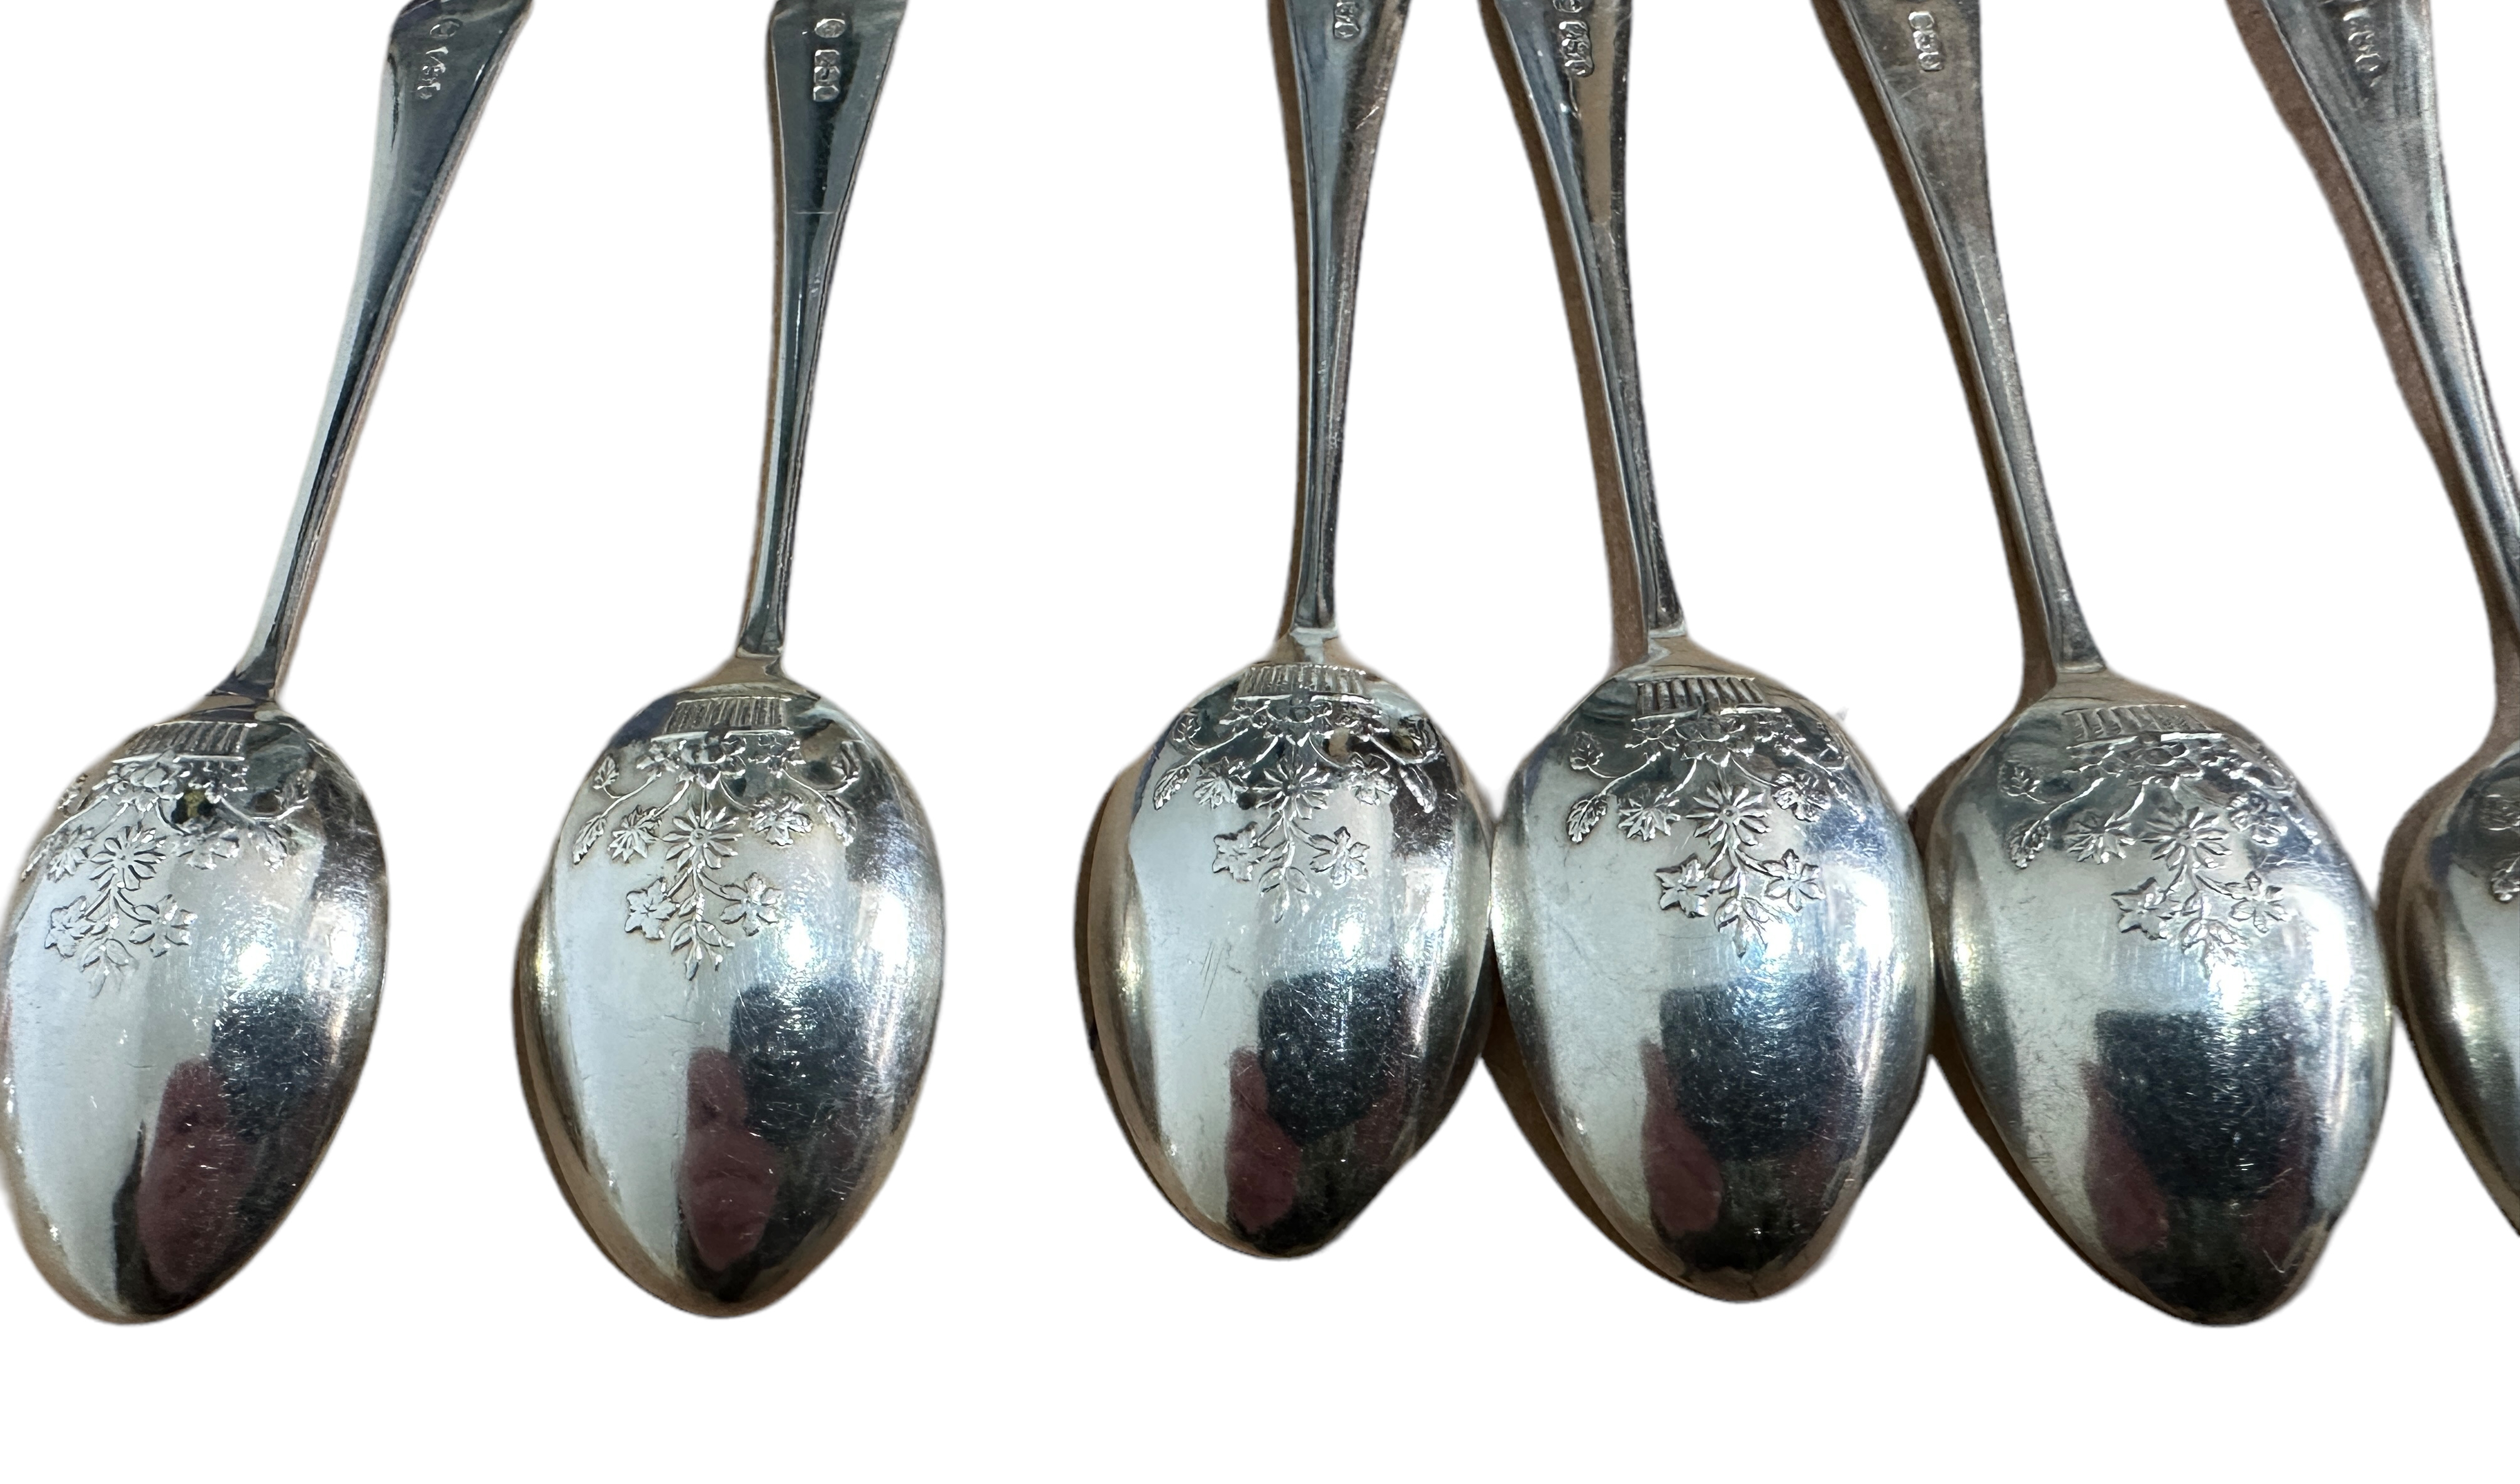 Lot of 11 Silver Spoons with decorated back of bowls - 12.5cm long. - Image 3 of 4